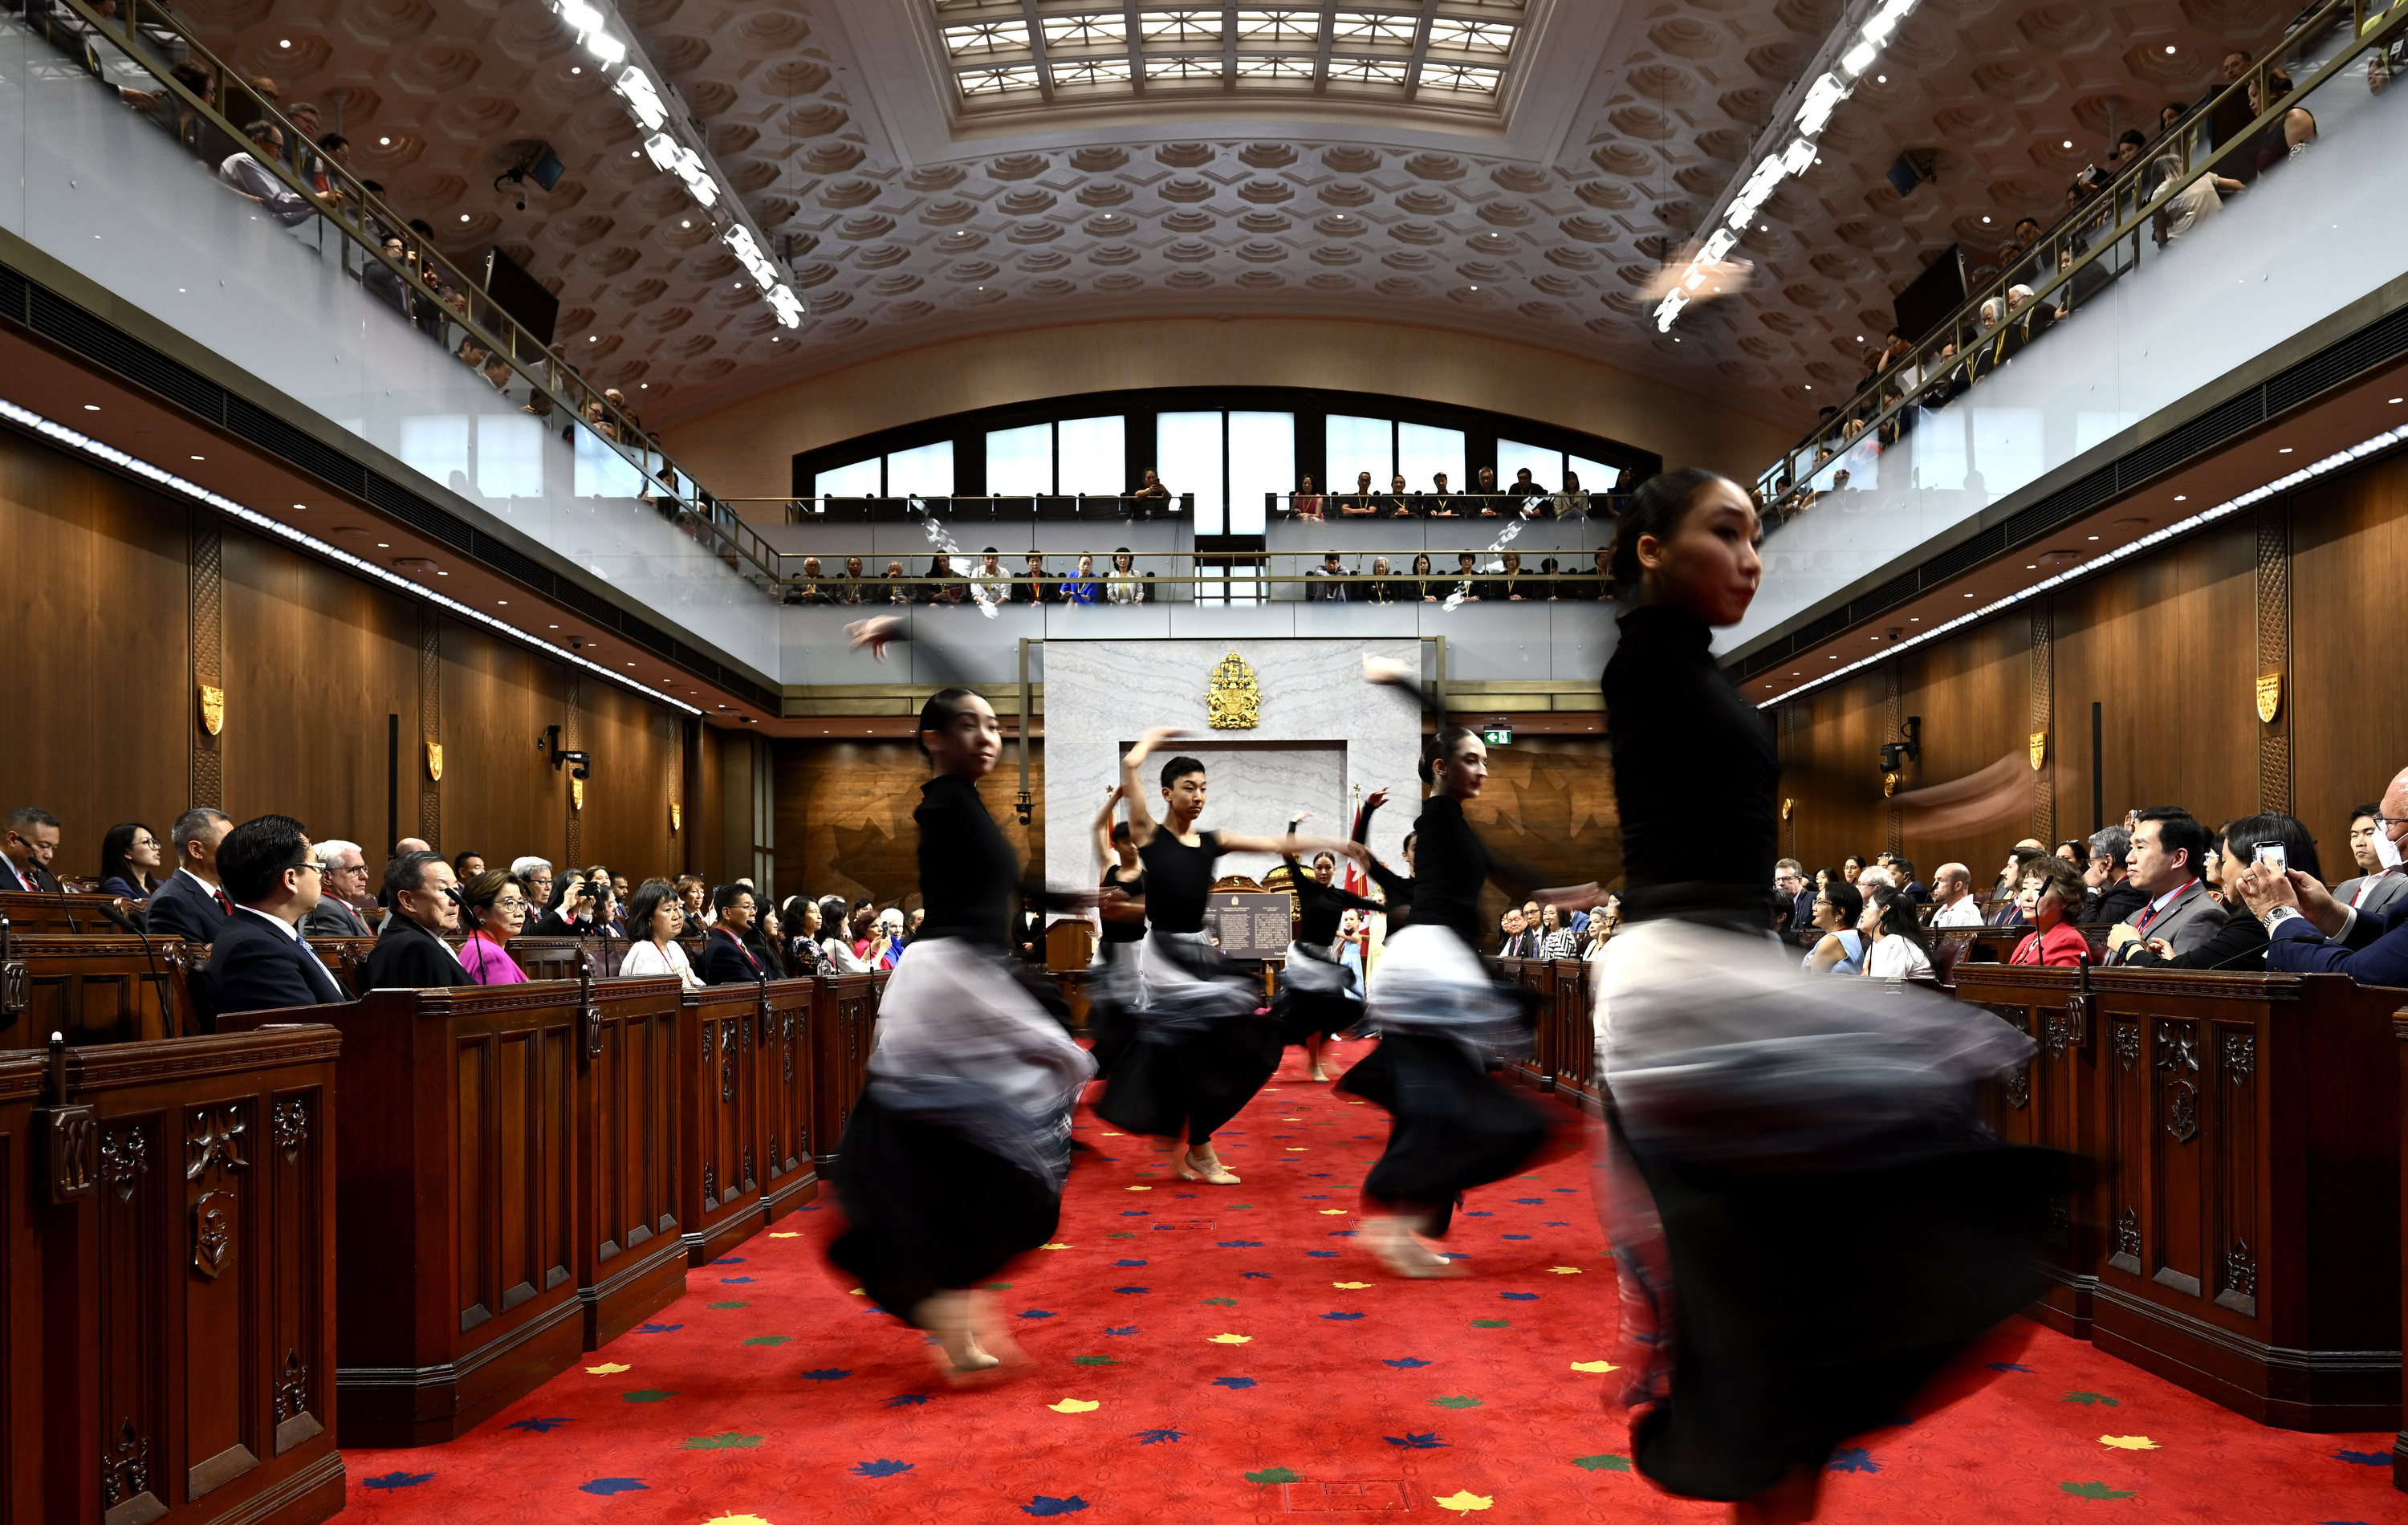 Dancers from Goh Ballet perform during the National Remembrance Ceremony for the 100th Anniversary of the Introduction of the Chinese Exclusion Act, on June 23 in the Senate Chamber in Ottawa. Photo: The Canadian Press via AP